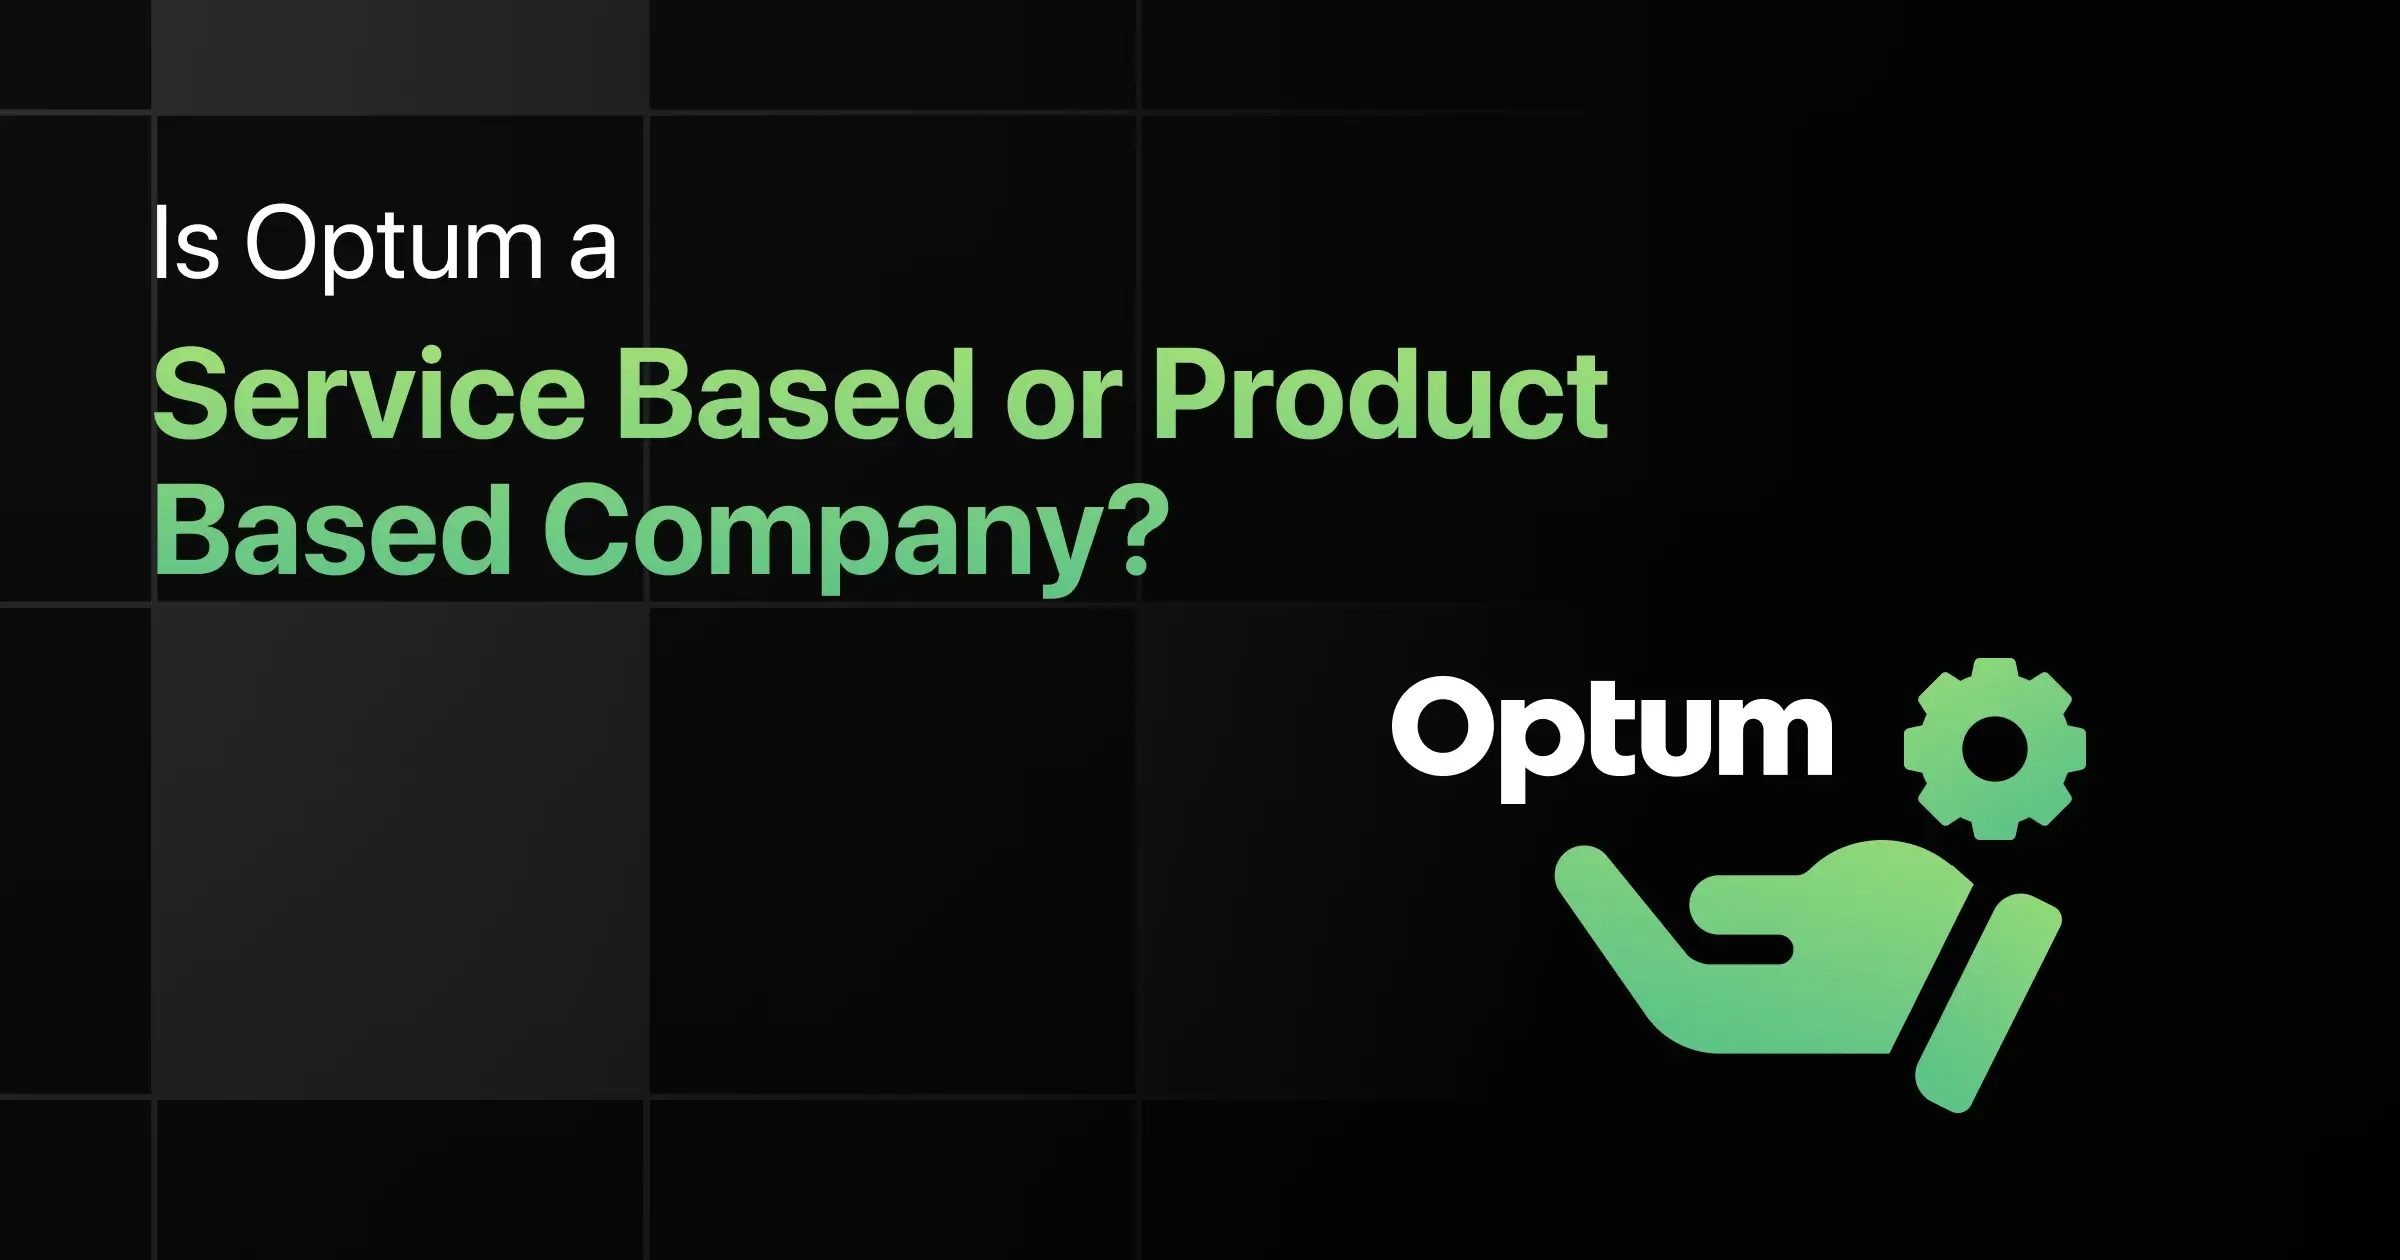 Is Optum a Service Based or Product Based Company?